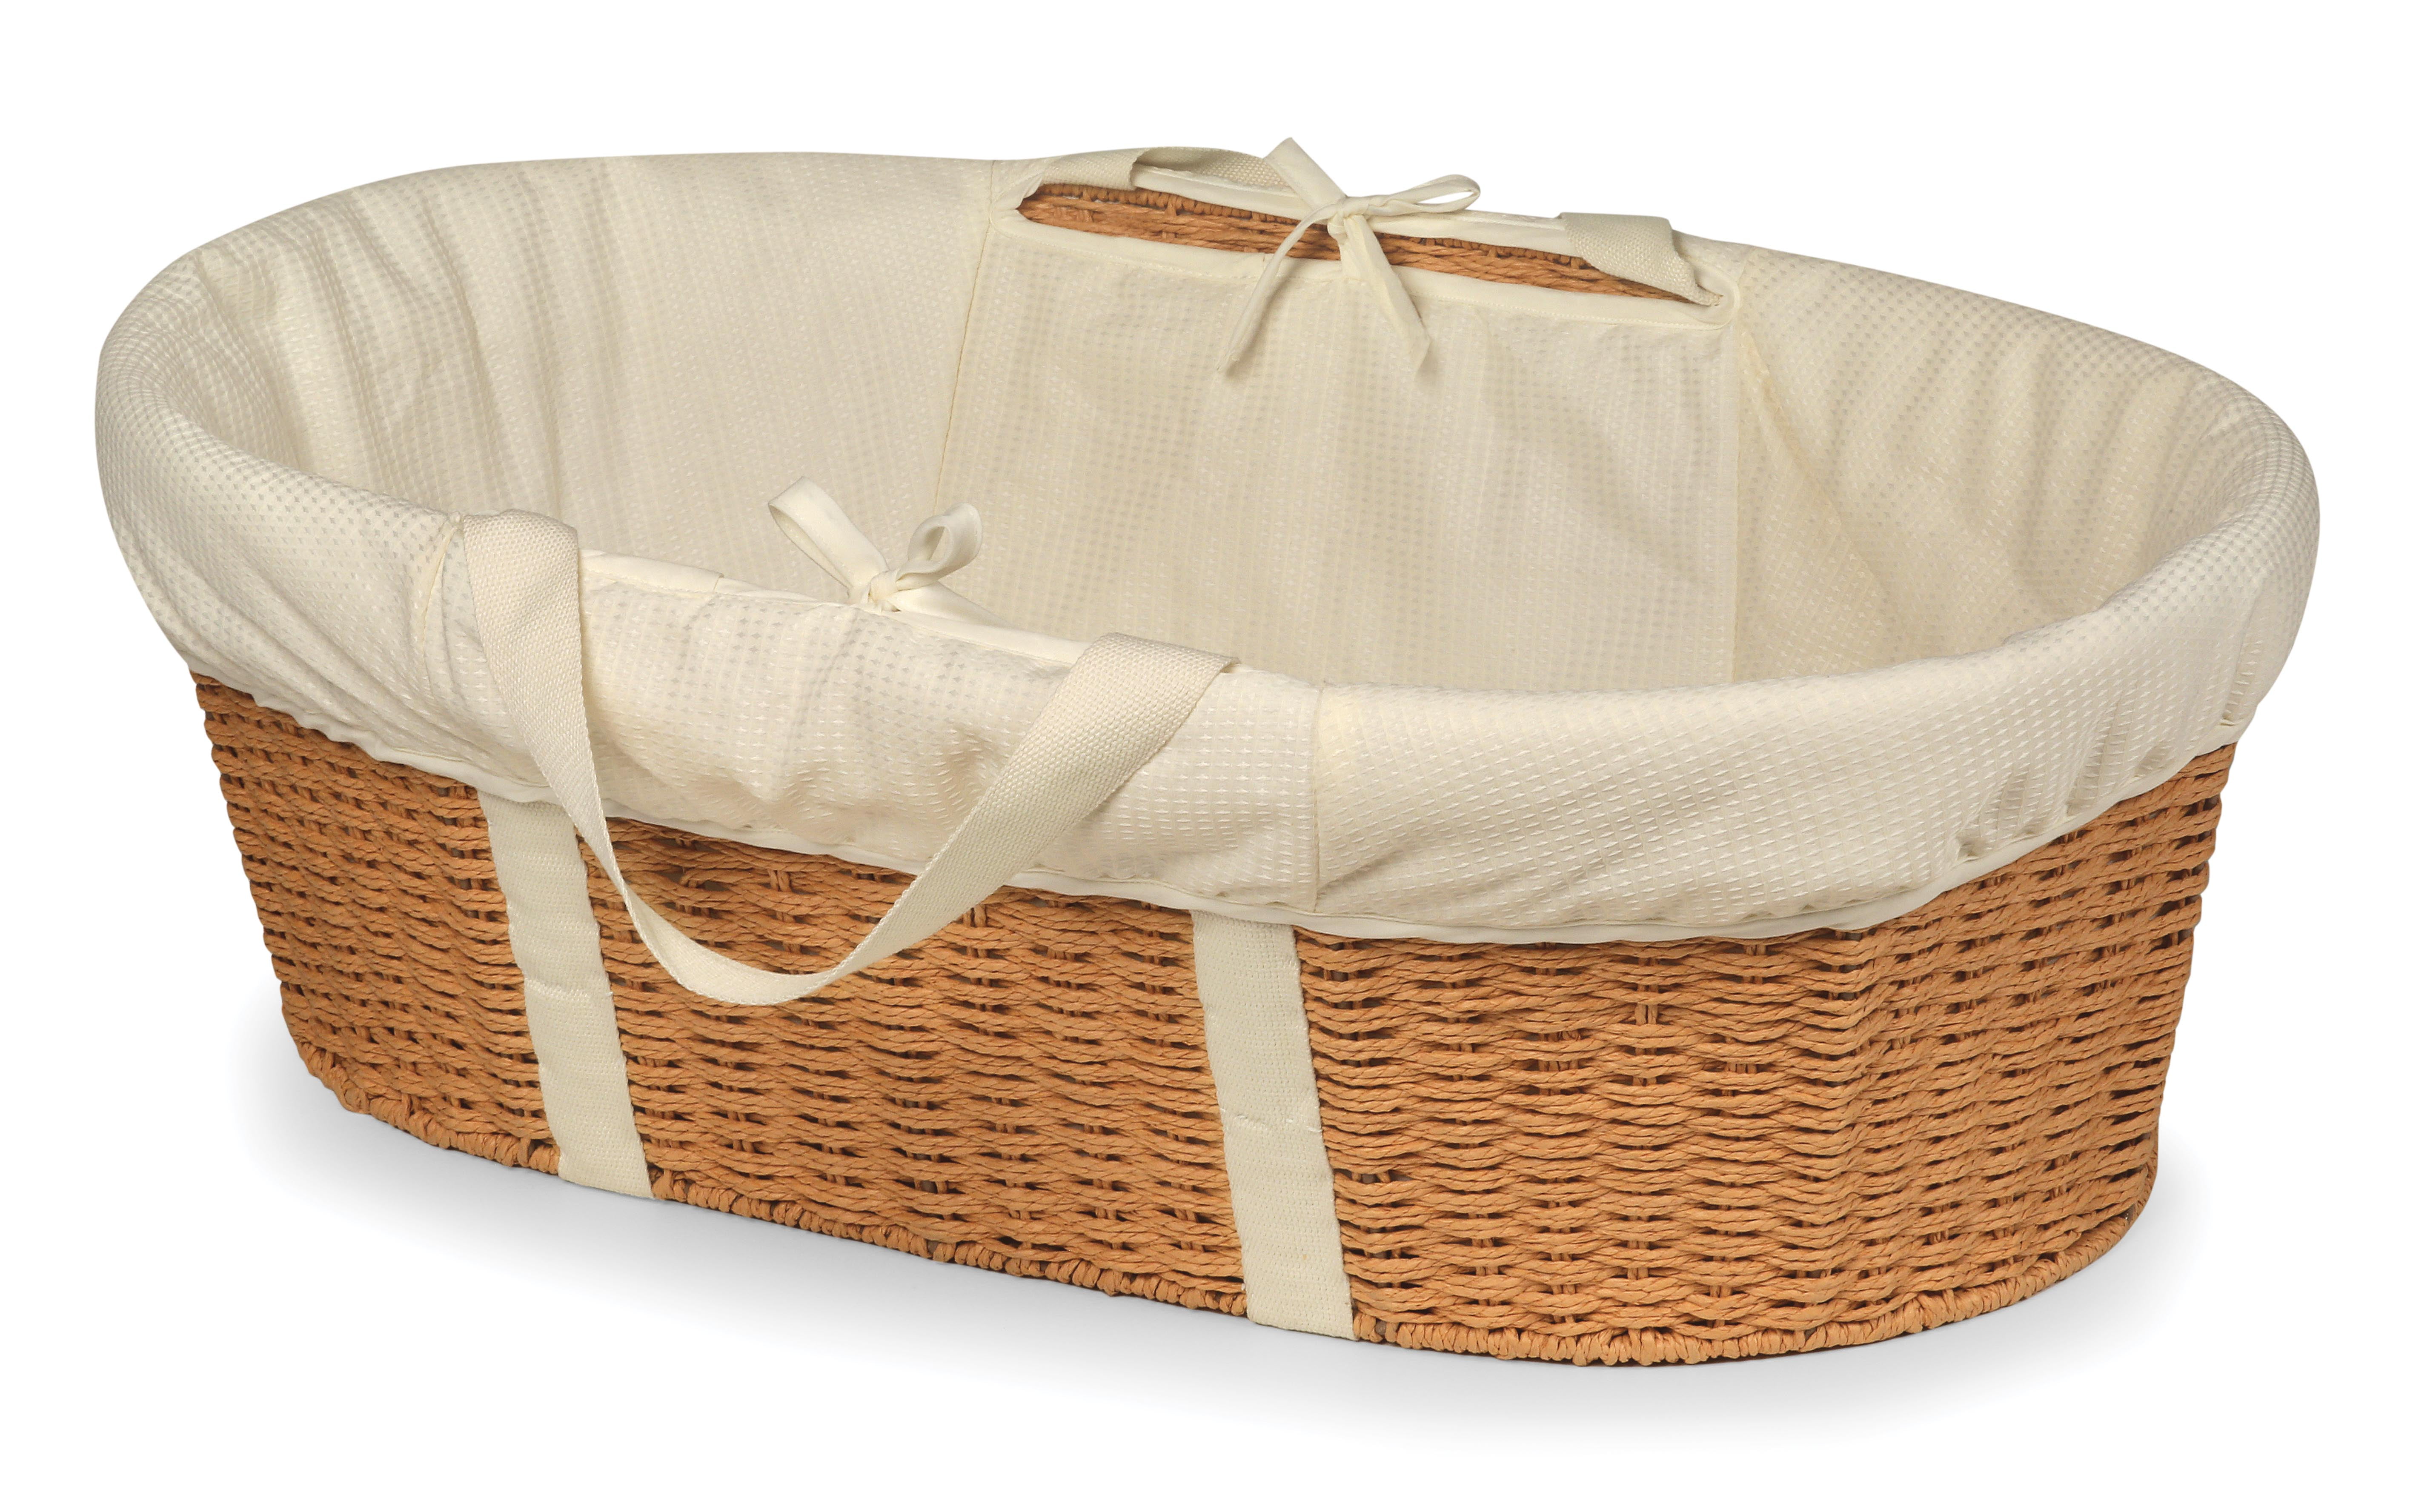 GREY/WHITE WICKER WHEELS CRIB BABY MOSES BASKET WITH CANOPY HOLDER 